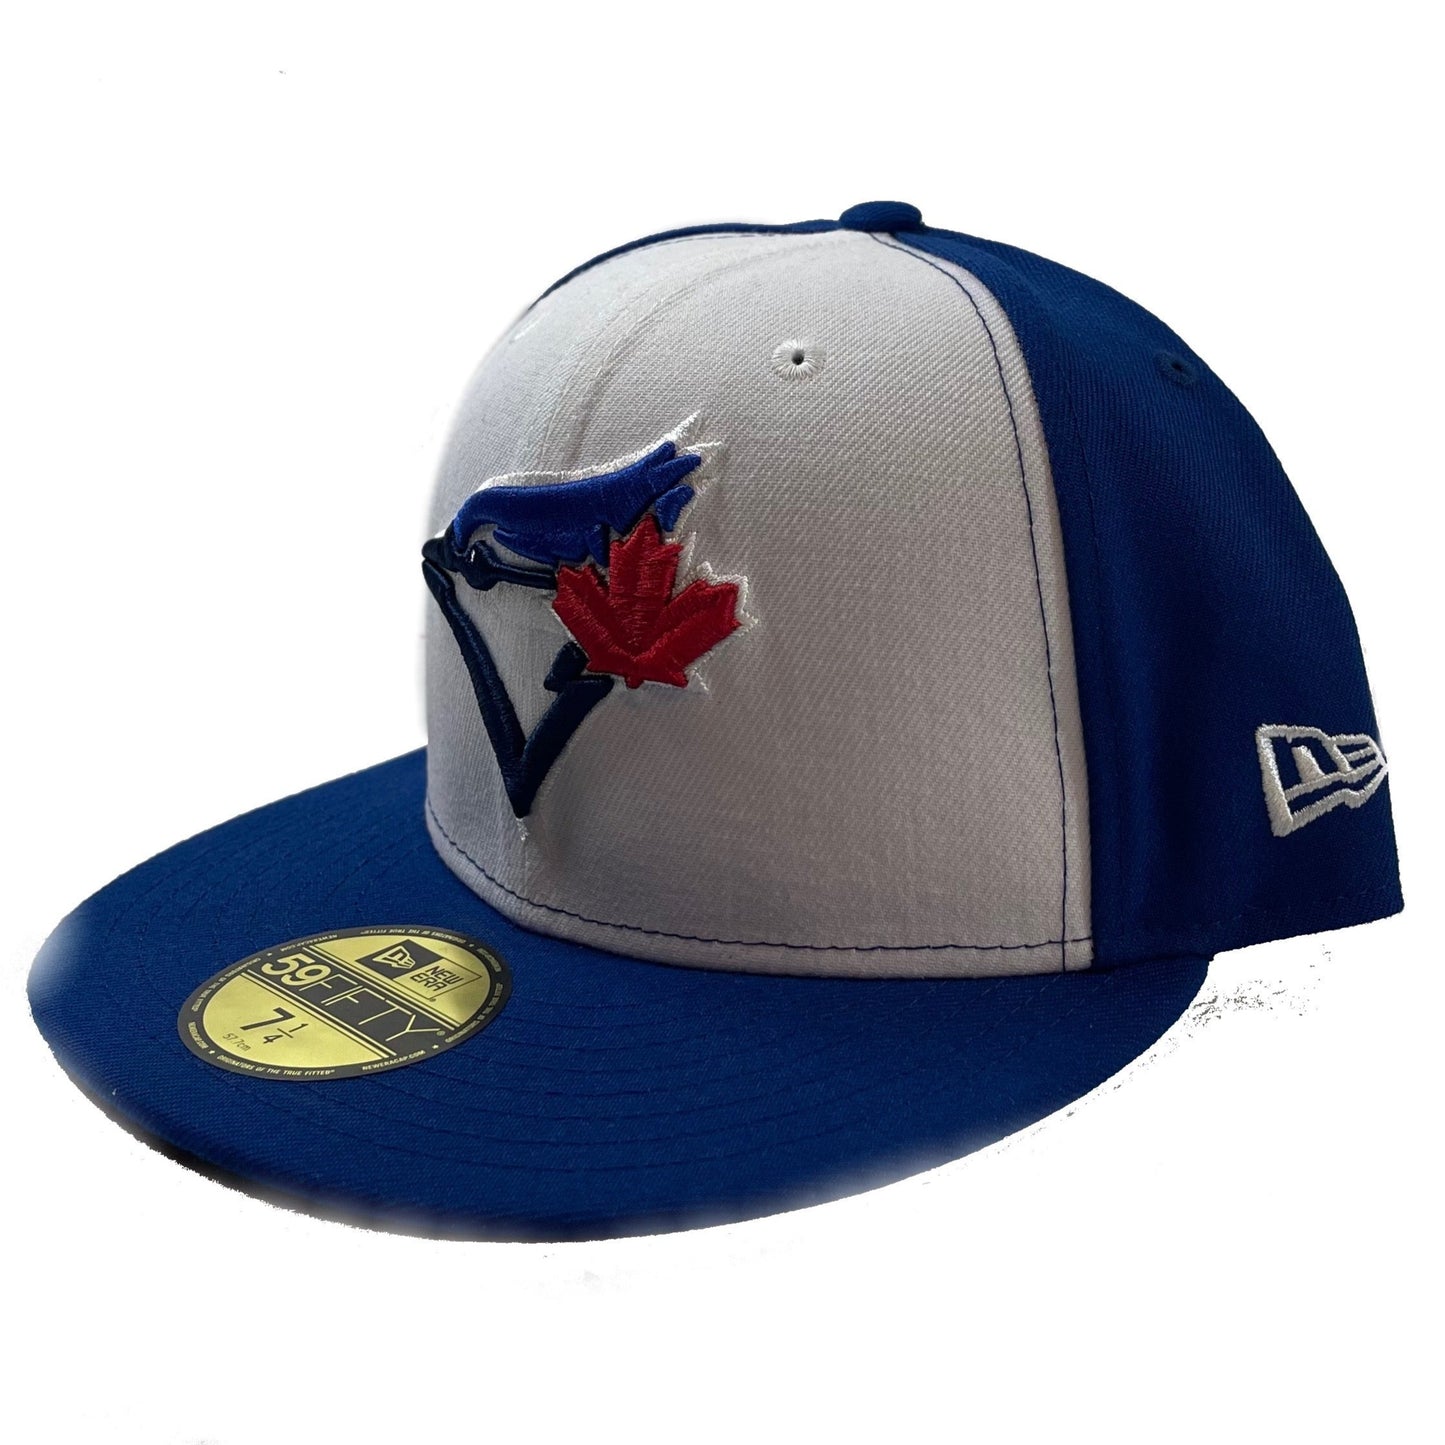 Toronto Blue Jays (White/Blue) Fitted